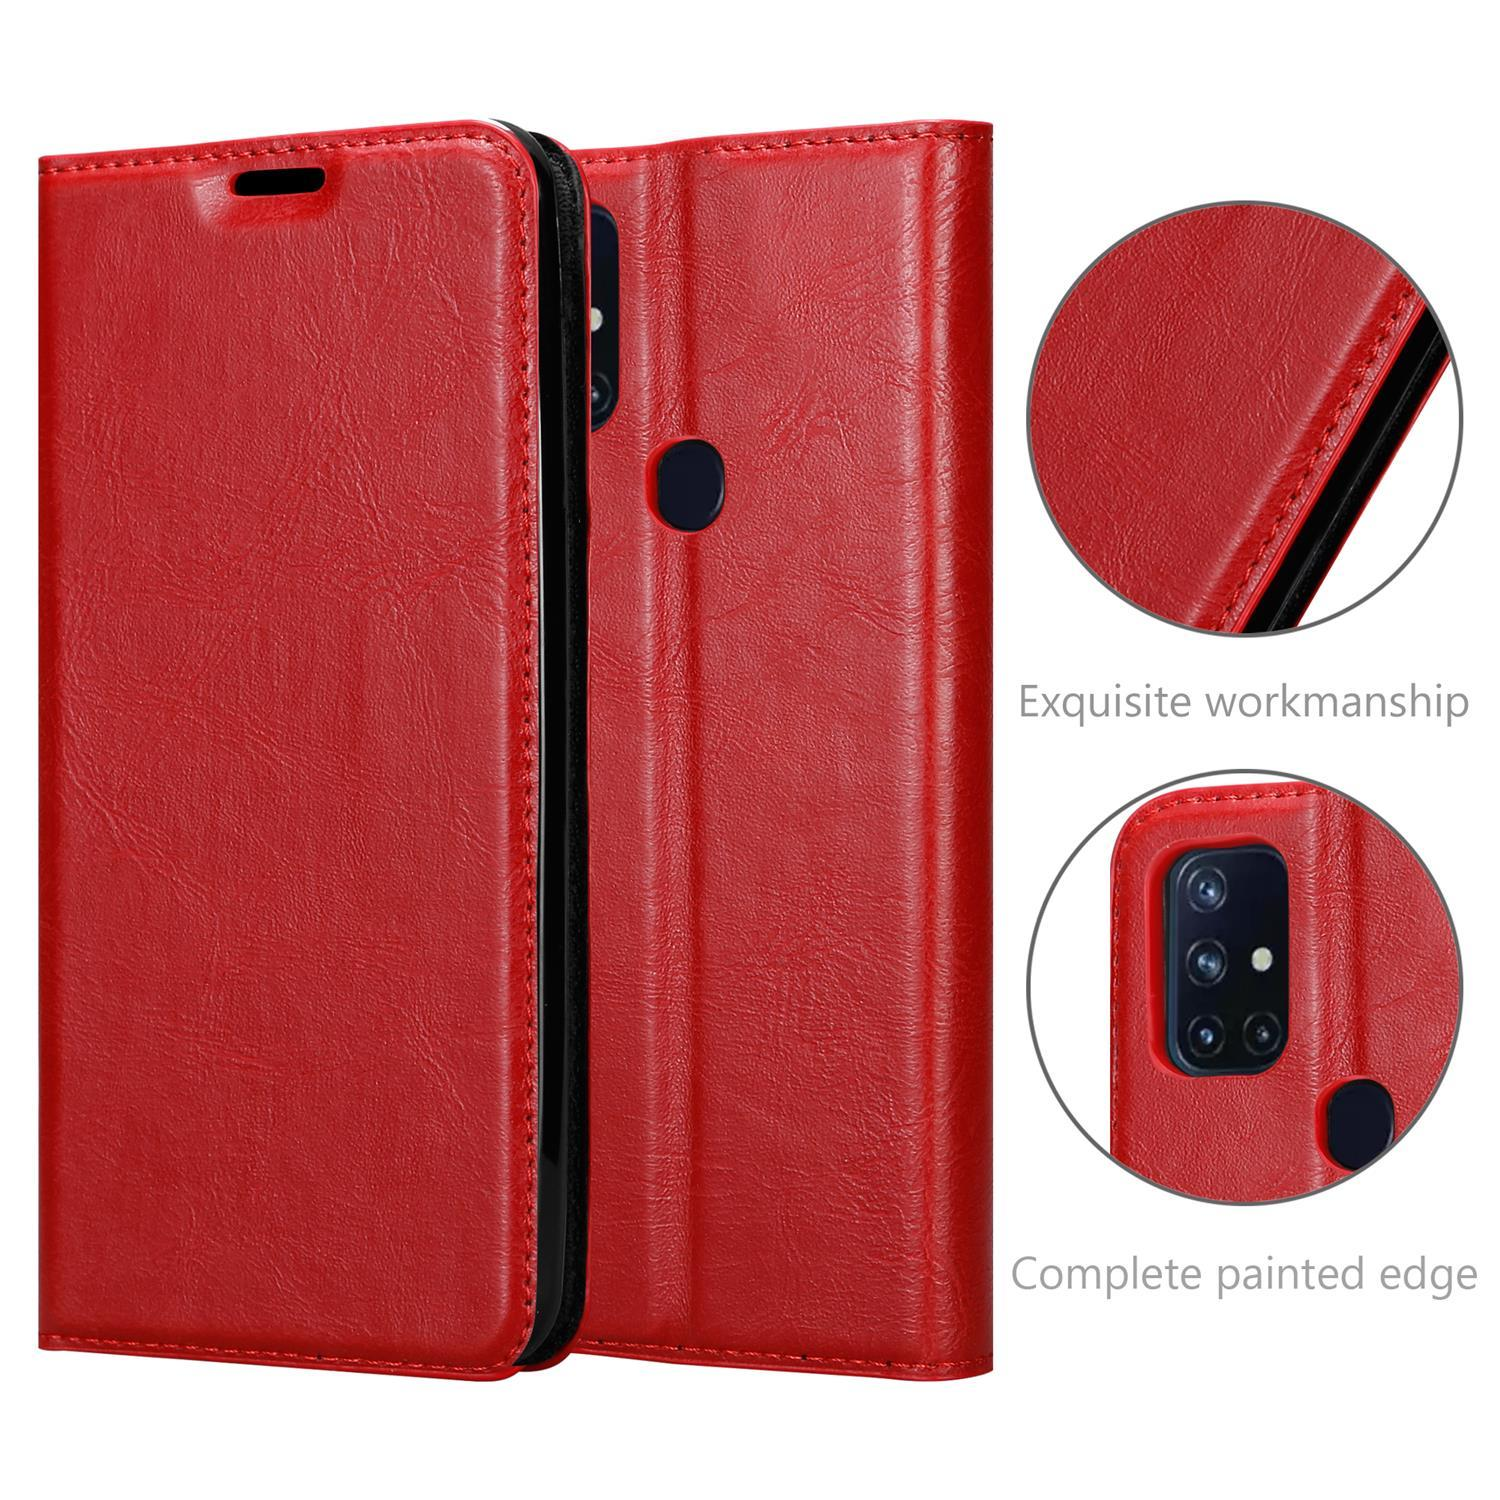 Book Hülle CADORABO N10 5G, ROT Bookcover, Invisible Nord OnePlus, APFEL Magnet,